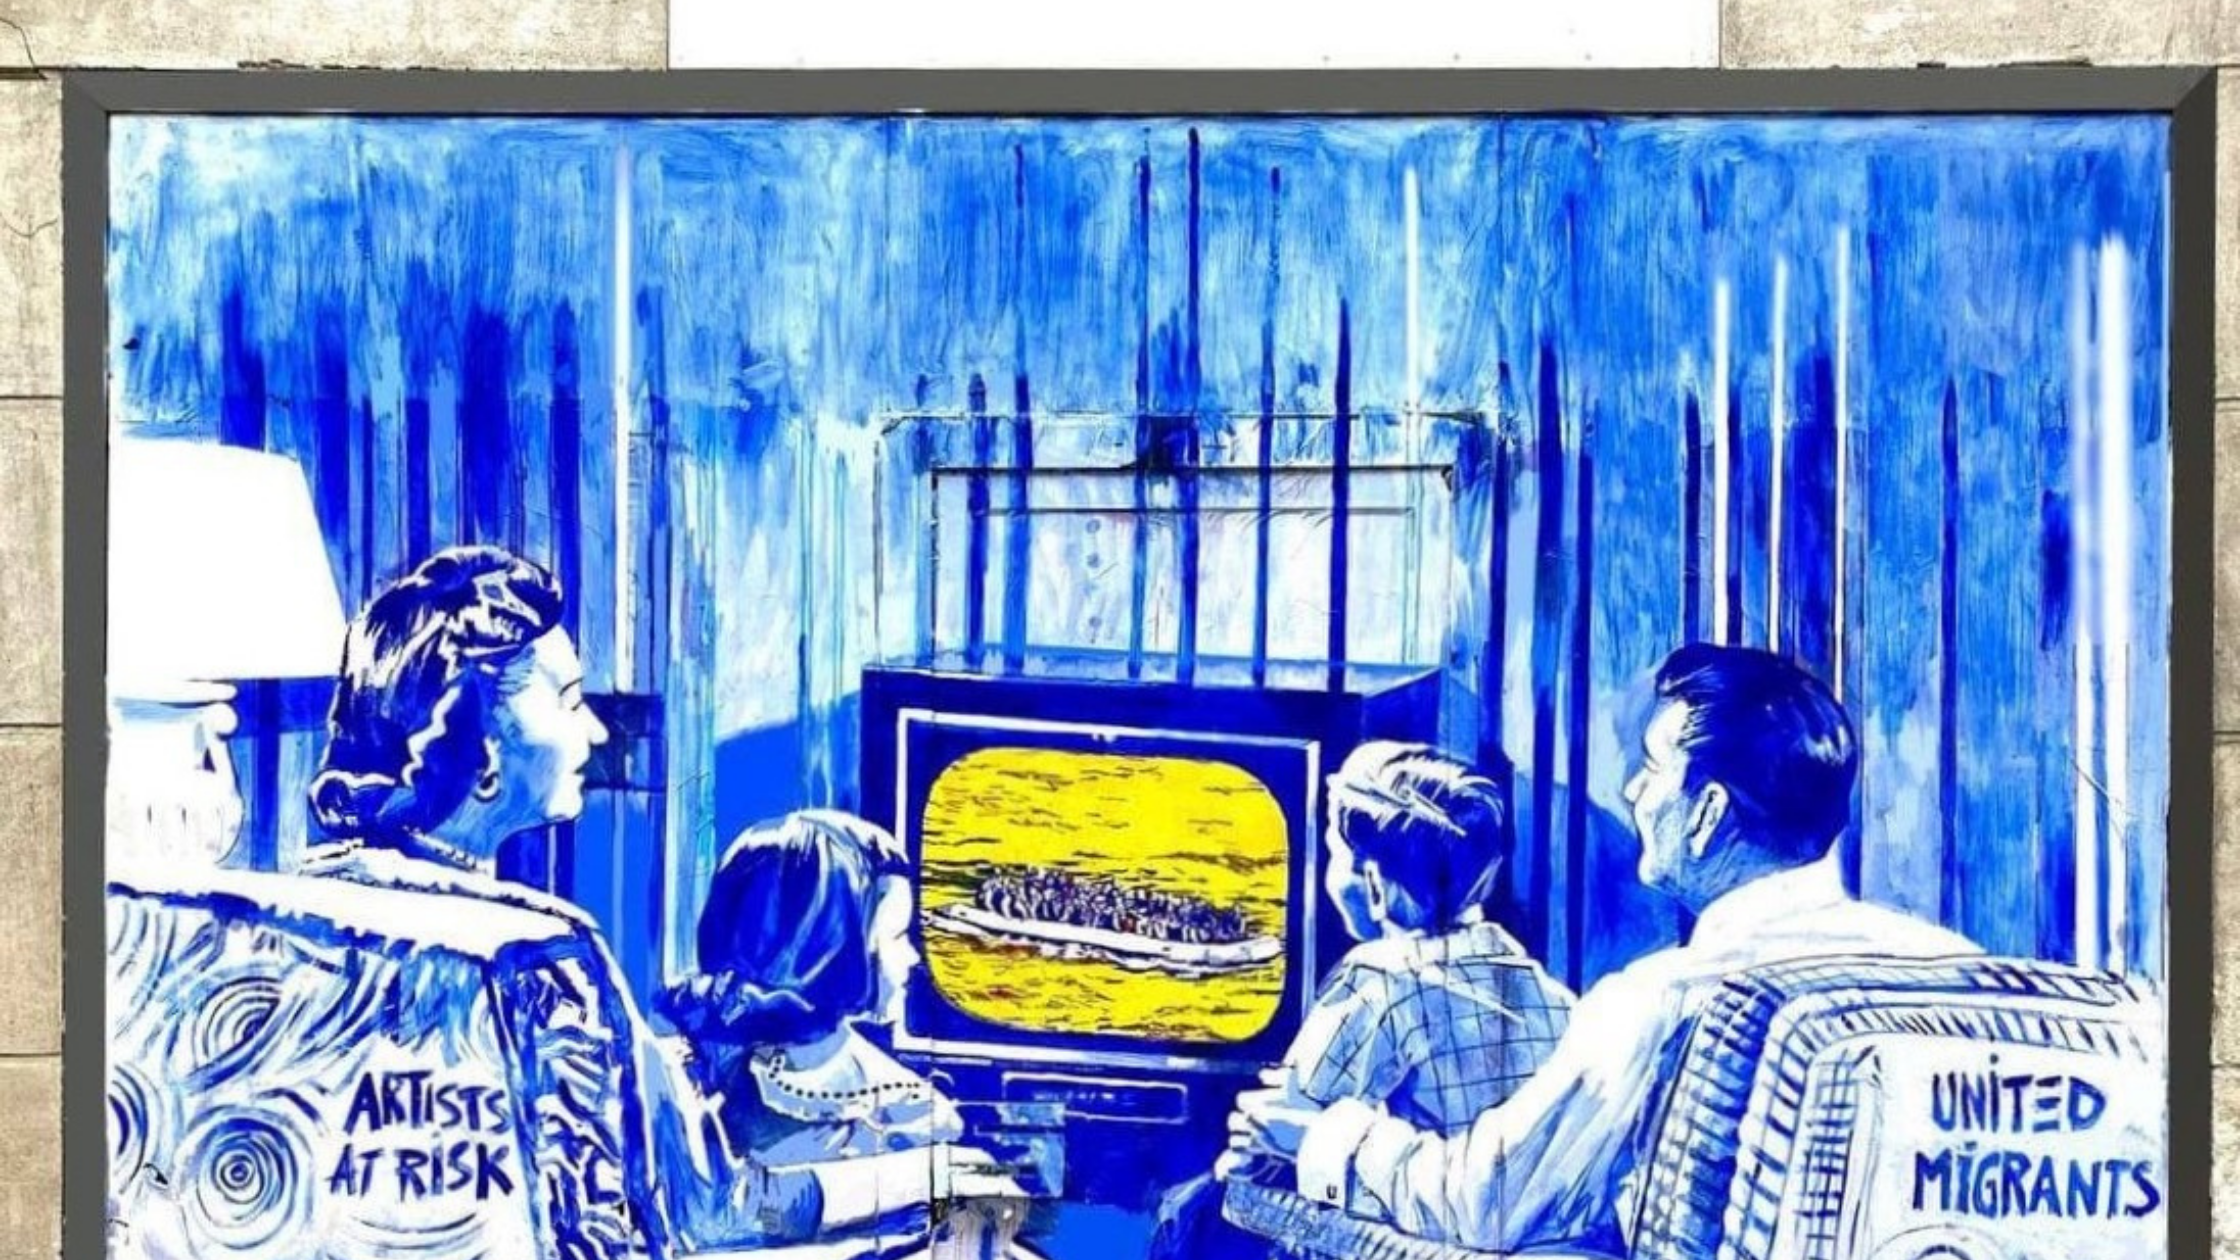 Mural on entrance to 210 House of Healing showing family of 4 sitting in armchairs watching TV. On tv is a boat with migrants. Armchairs have the words "Artists at Risk" and "United Migrants"